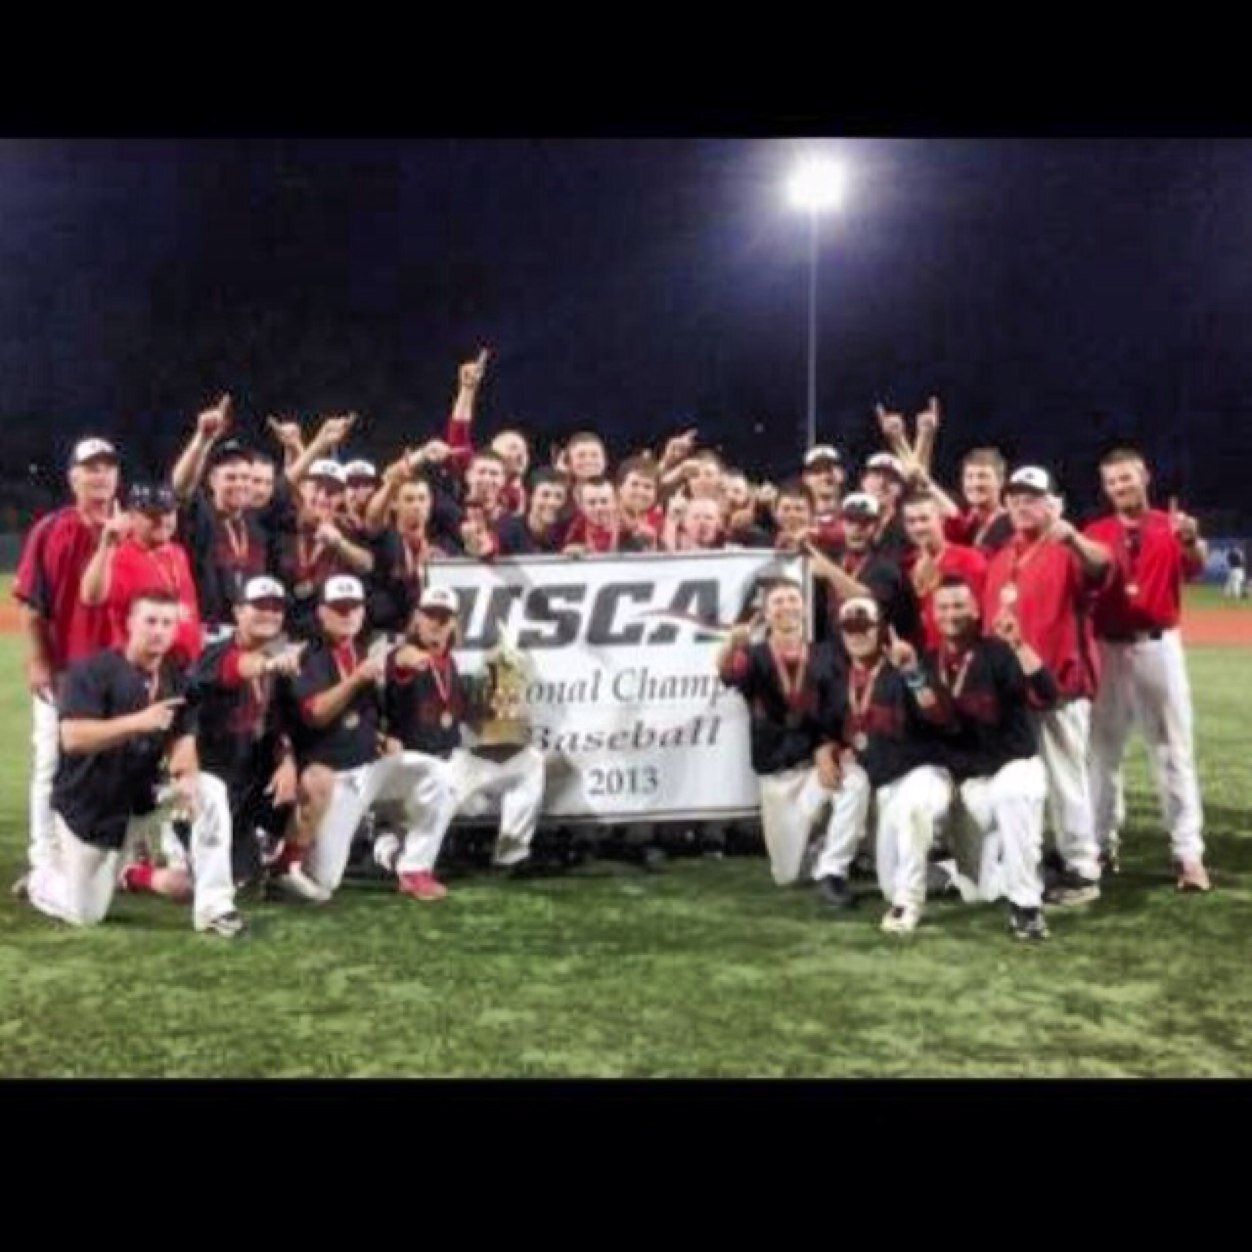 UC Clermont Cougars Baseball Team. 2013 USCAA National World Series Champs. Follow the Cougars through their 2014 season as they look to repeat their success.